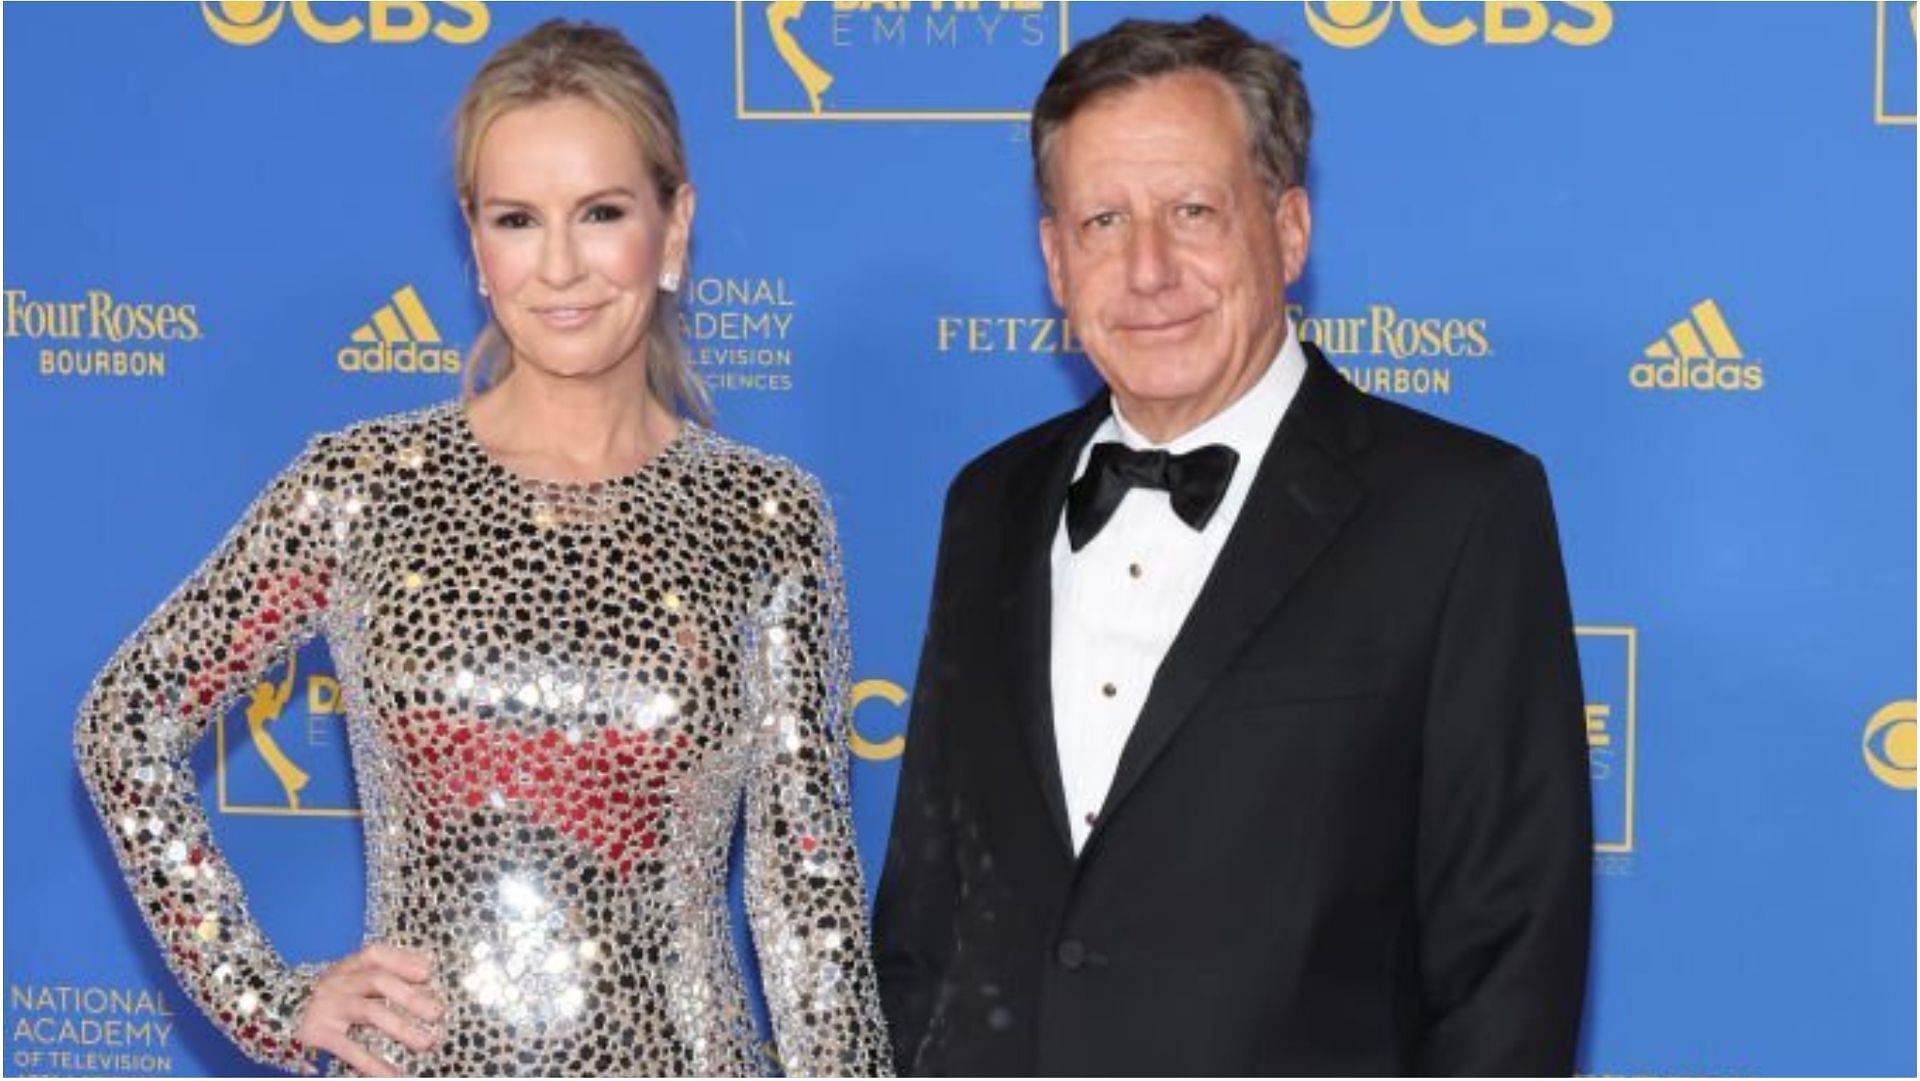 Jennifer Ashton and Tom Werner recently exchanged vows (Image via Amy Sussman/Getty Images)